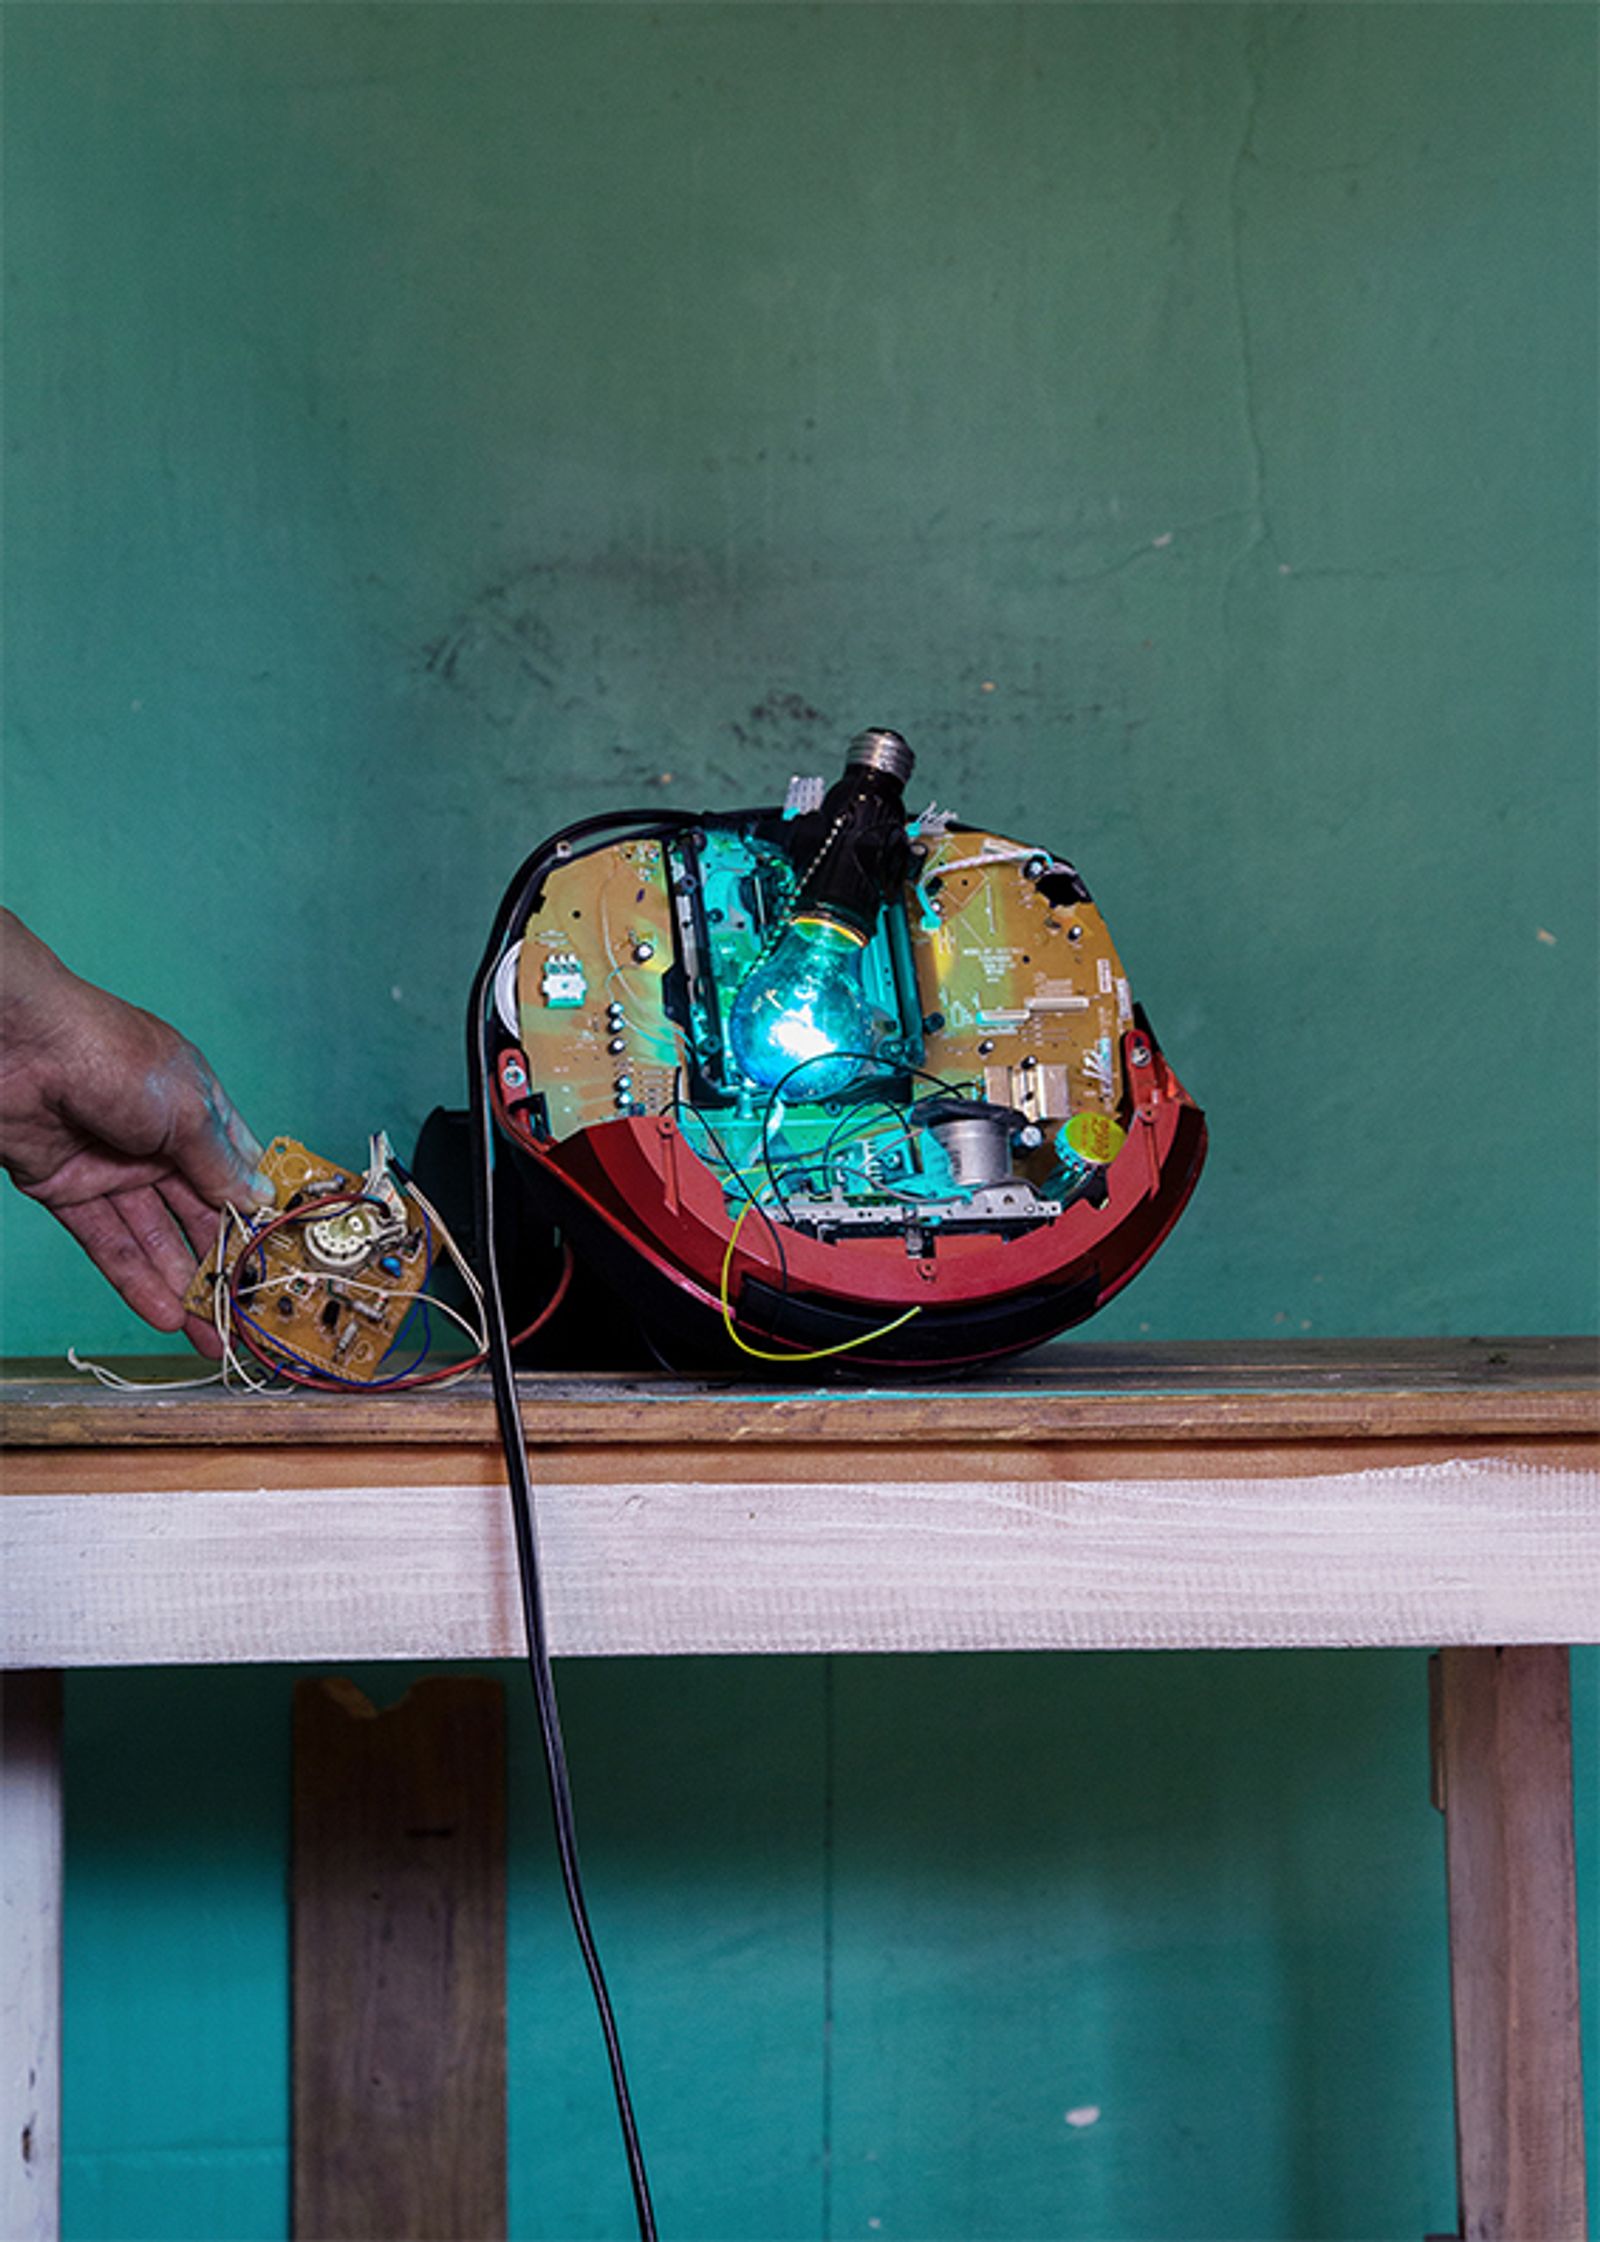 © Denis Serrano - Edmundo shows one of the radiophonic devices that he has repurposed by adding other objects into it.